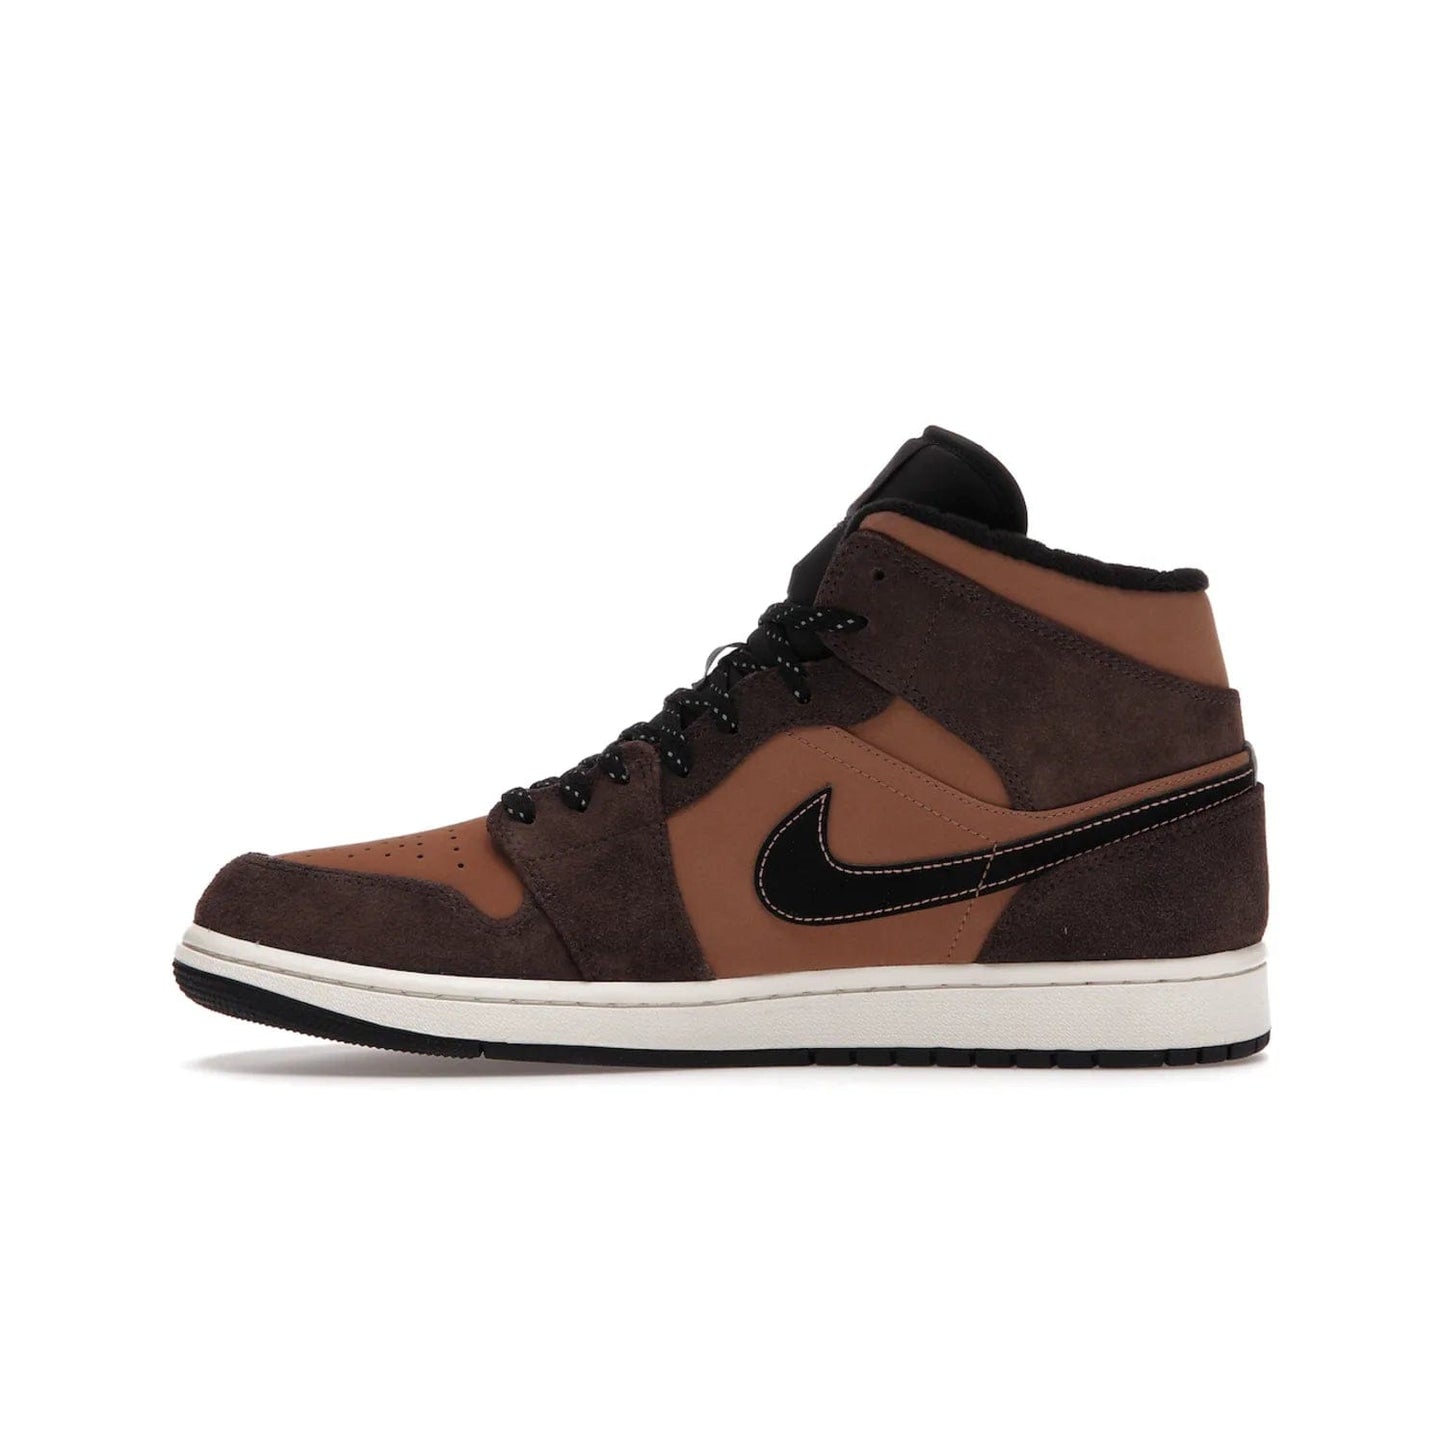 Jordan 1 Mid SE Dark Chocolate - Image 19 - Only at www.BallersClubKickz.com - This fashionable and functional Jordan 1 Mid SE Dark Chocolate features a light brown Durabuck upper, dark brown suede overlays, black Swoosh logos and reflective patch at heel. A must-have for any sneakerhead!